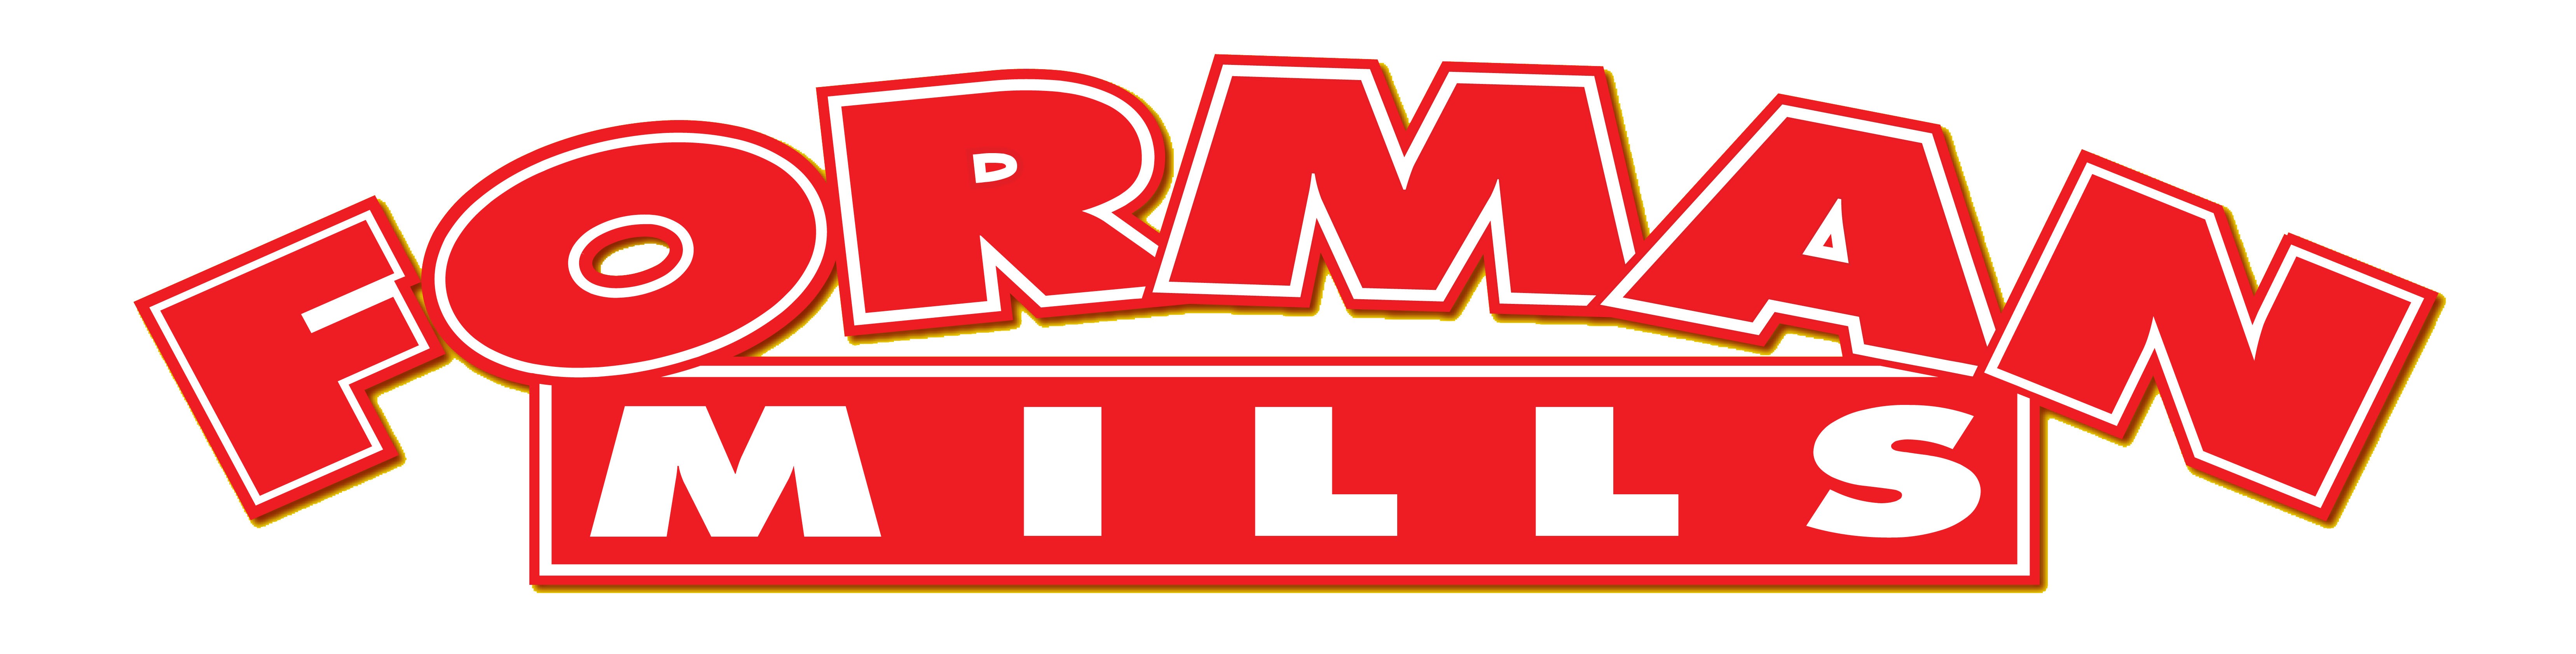 Forman Mills Pay Rate